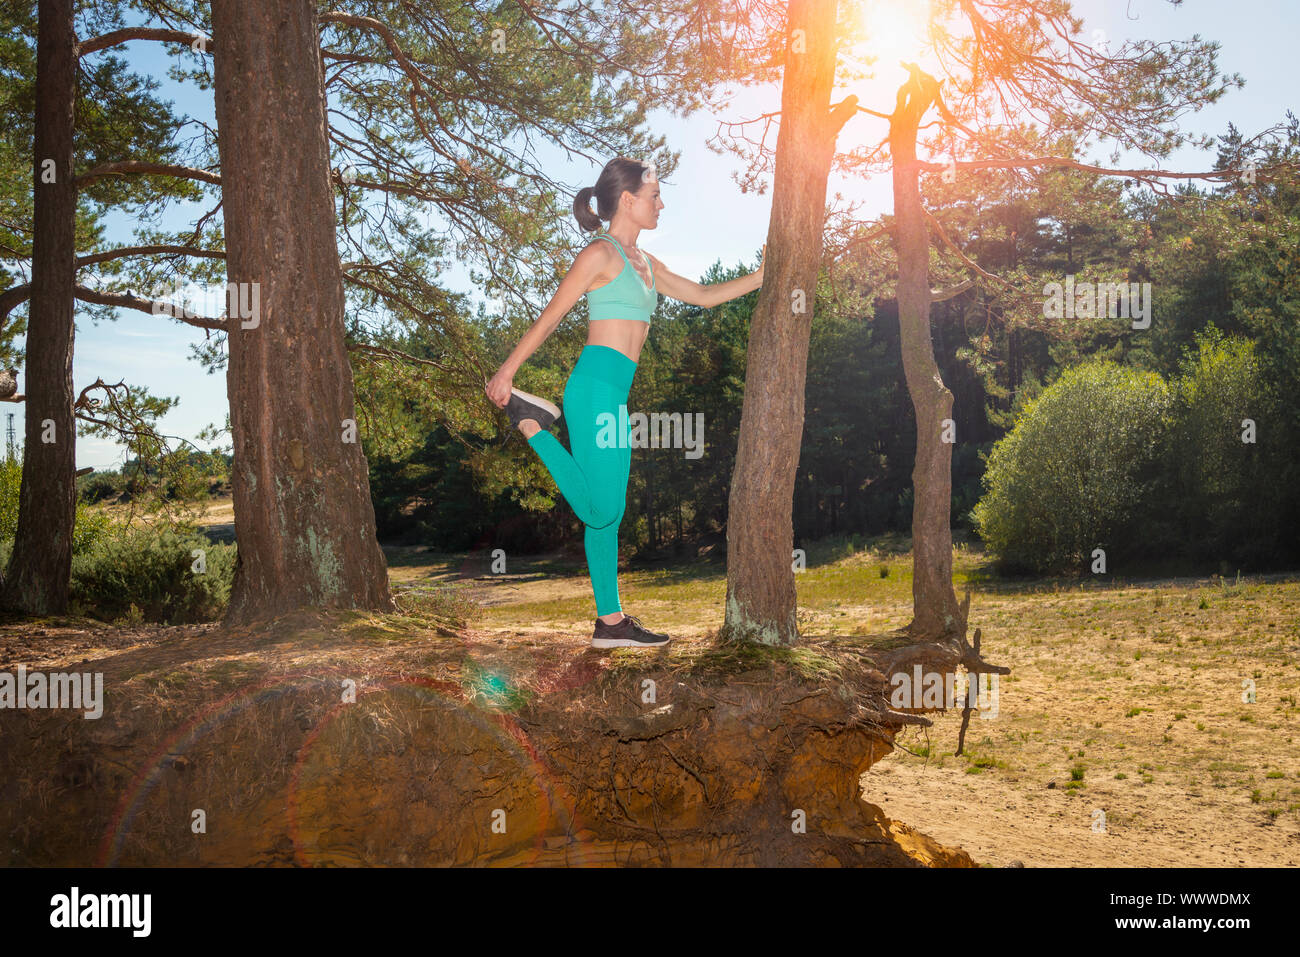 woman athlete doing a leg stretch against a tree, yoga pose. Stock Photo